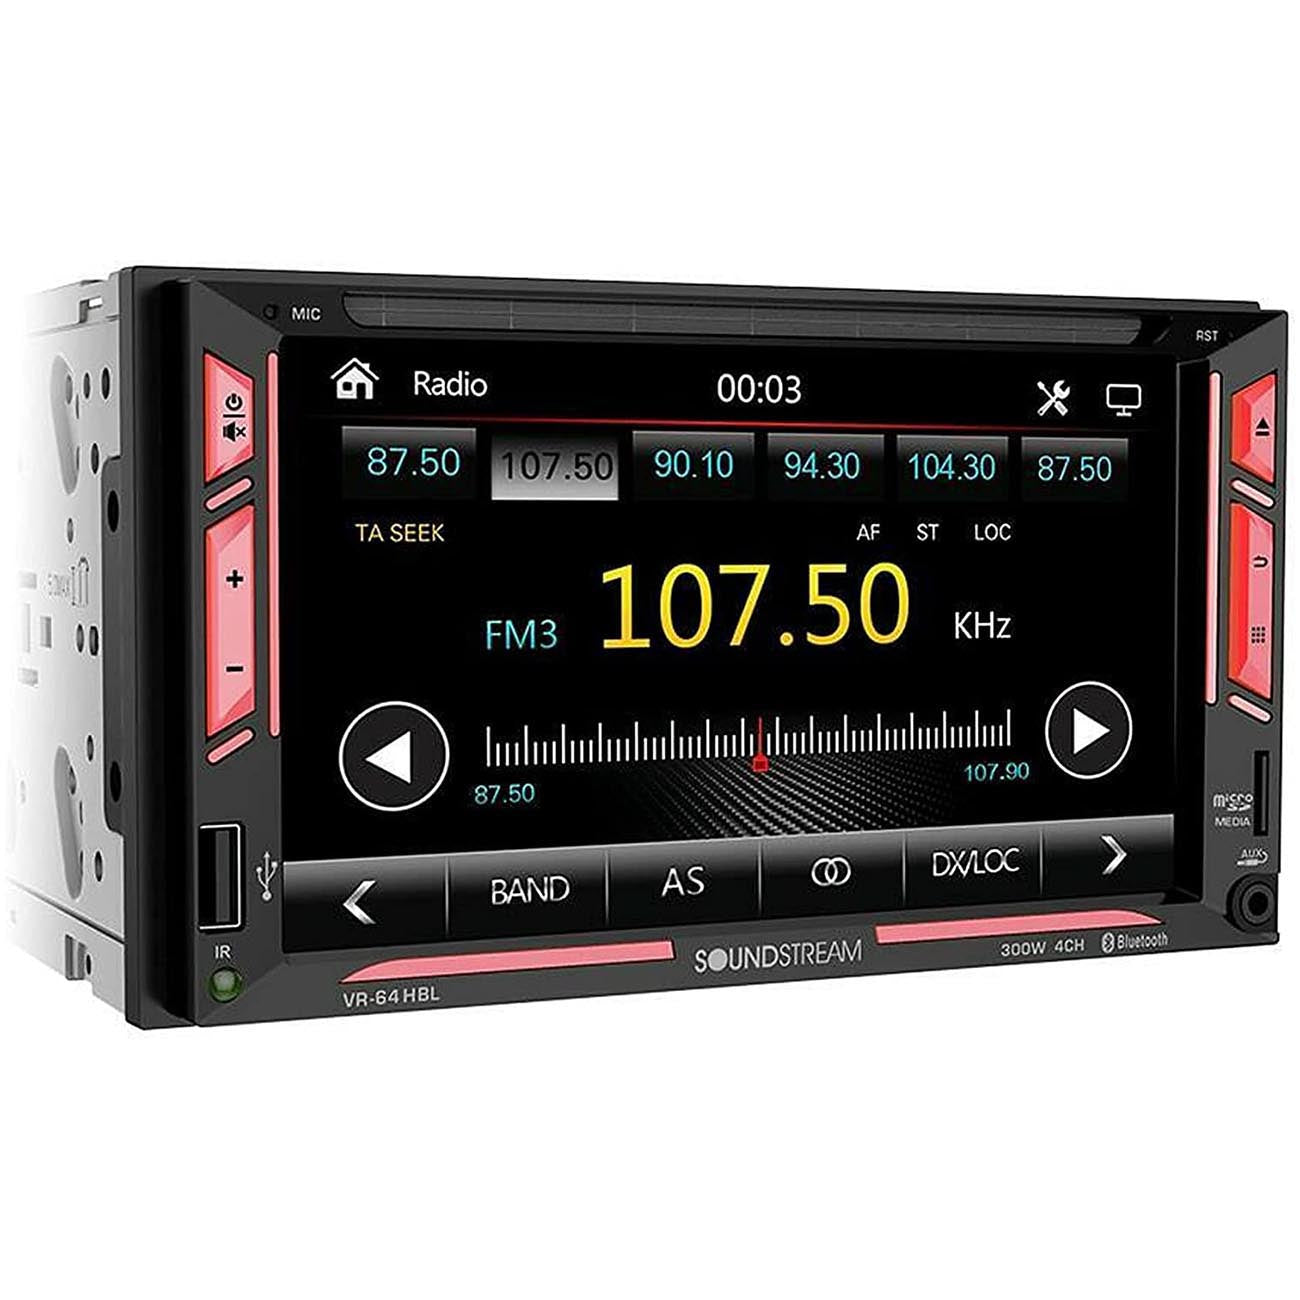 SOUNDSTREAM VR-64HBL Double Din Car Stereo Receiver, 7 Inch Touchscreen Bluetooth Multimedia Radio Backup Camera Ready, USB SD AUX MP3 MP4 Media